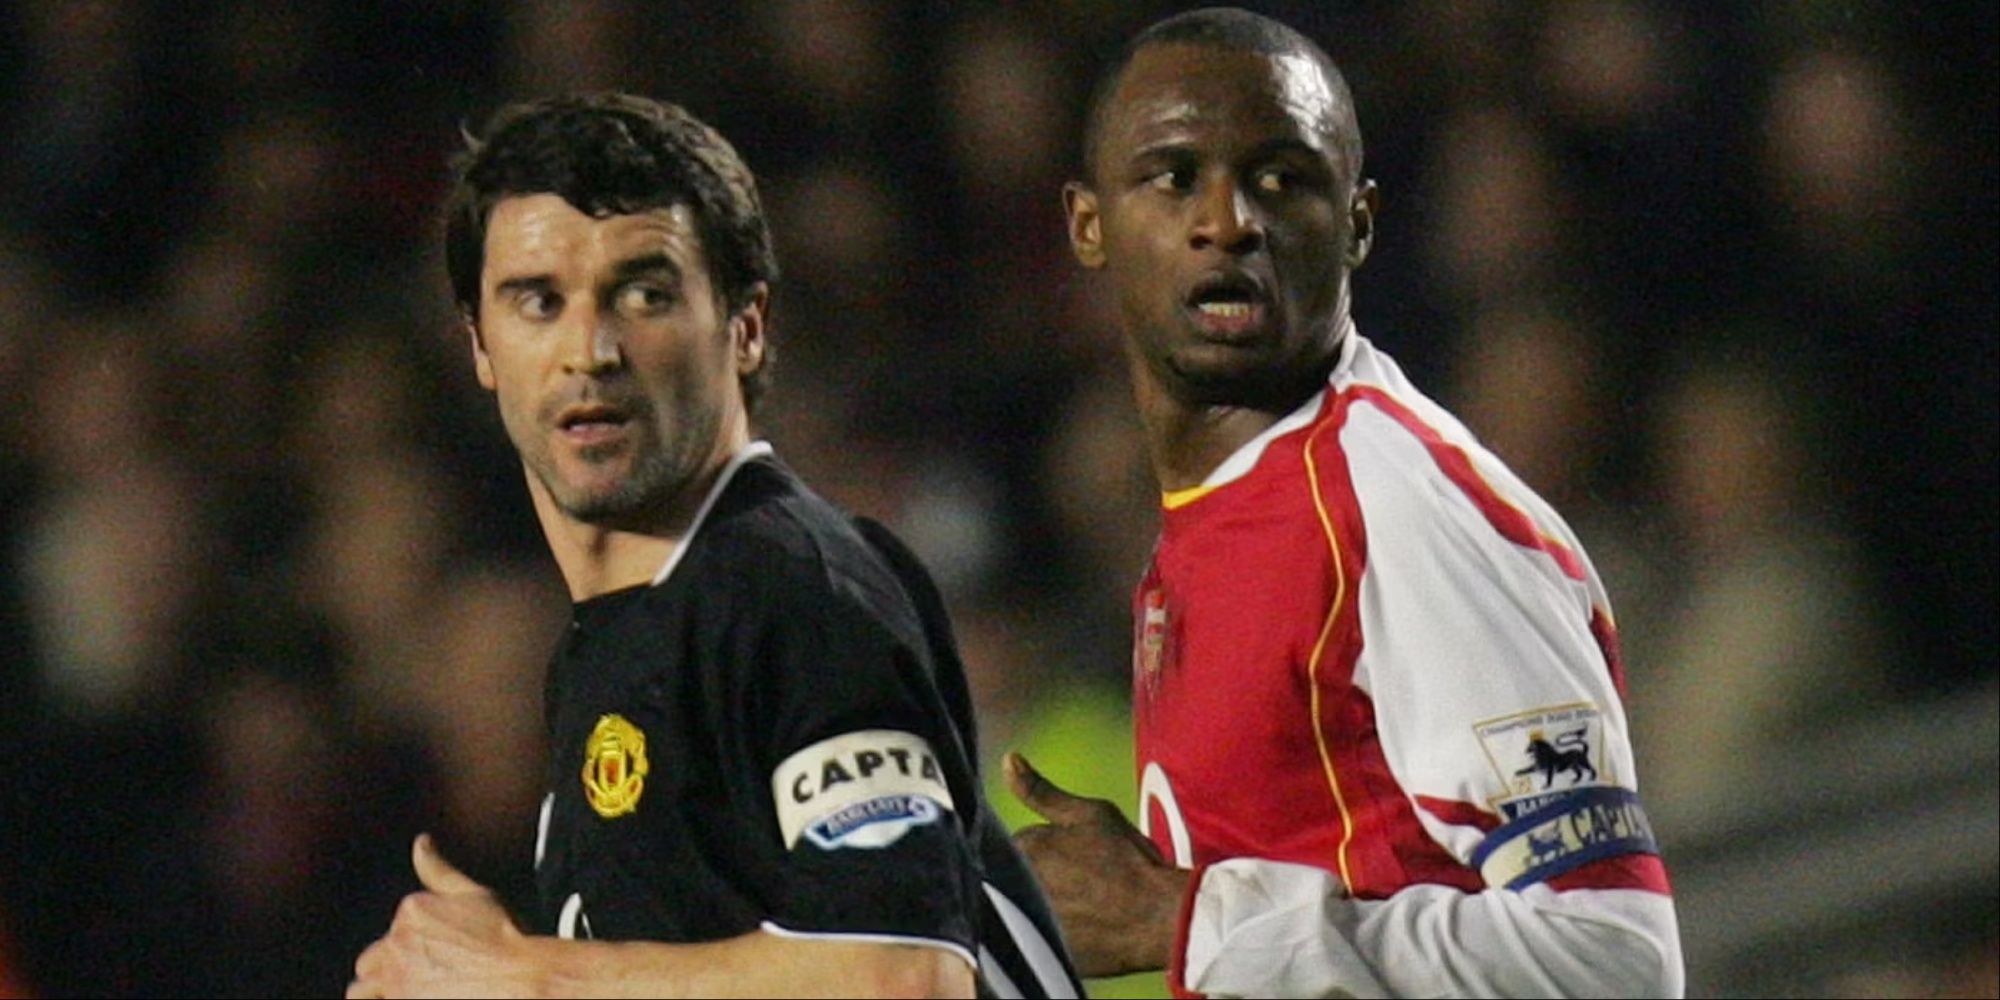 Manchester United's captain Keane and Arsenal's captain Vieira